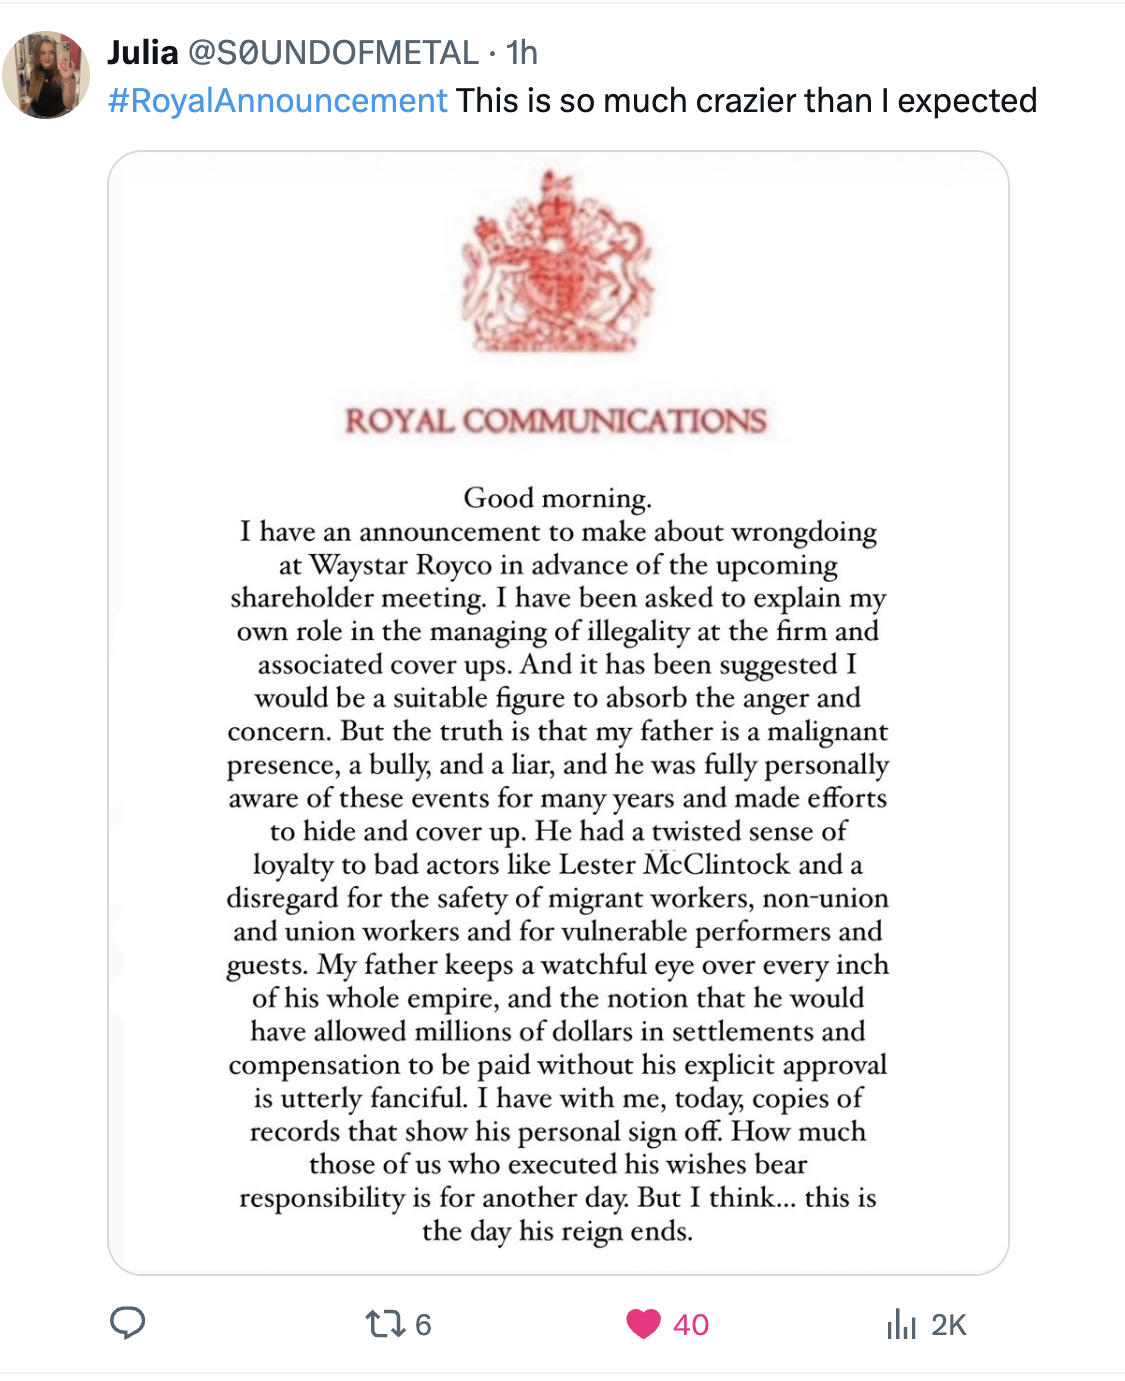 screenshot - 0 Julia 1h This is so much crazier than I expected Royal Communications Good morning. I have an announcement to make about wrongdoing at Waystar Royco in advance of the upcoming holder meeting. I have been asked to explain my own role in the 